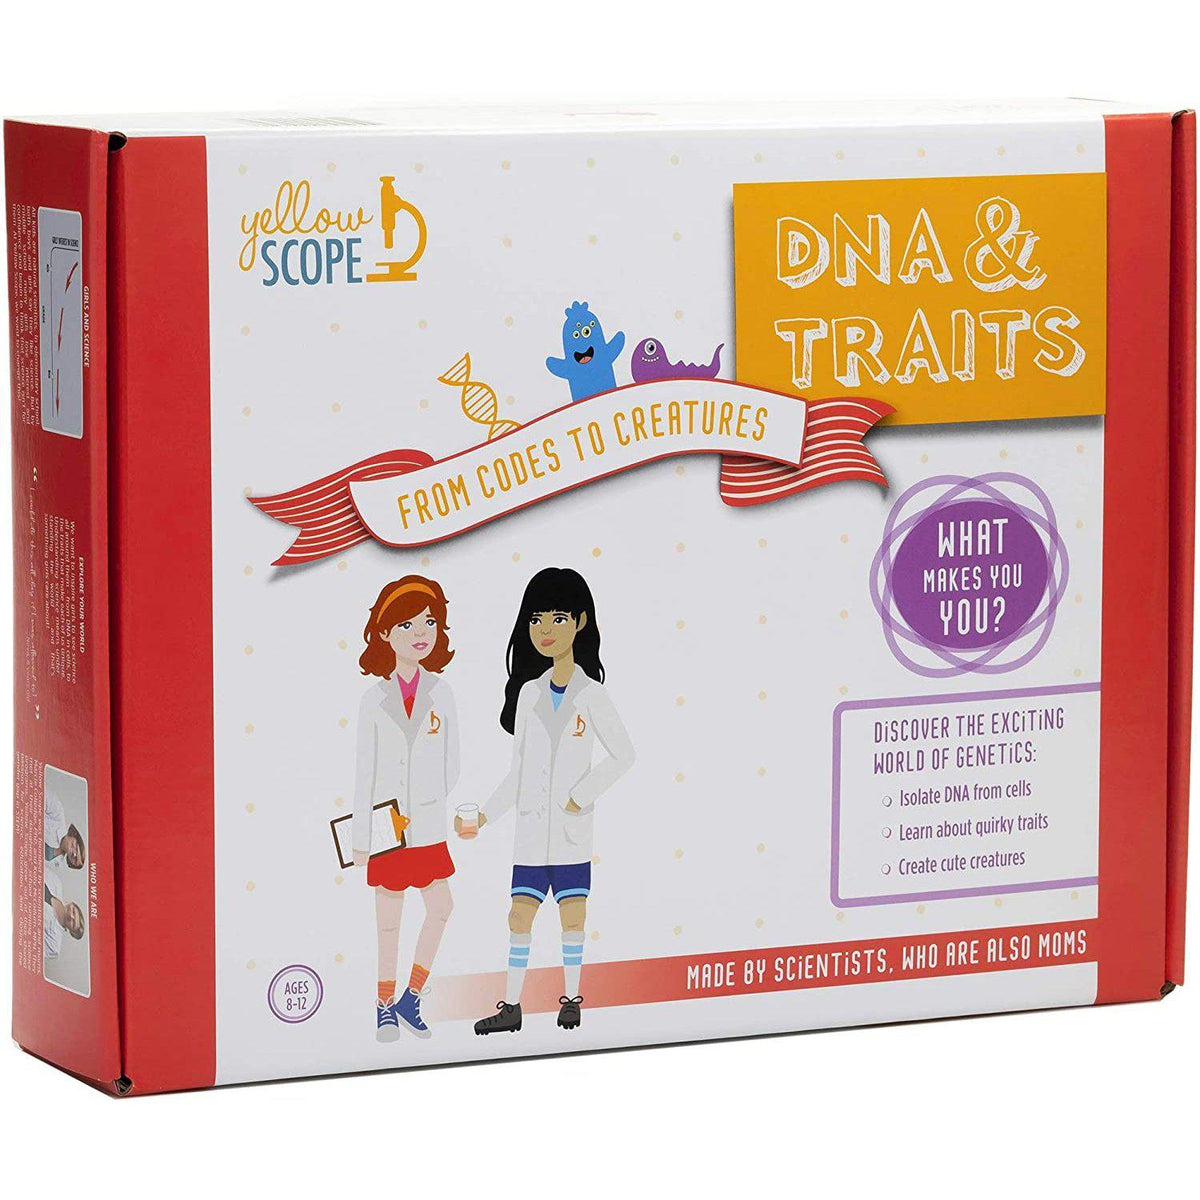 DNA &amp; Traits: From Codes to Creatures-Science &amp; Discovery-Yellow Scope-Yellow Springs Toy Company